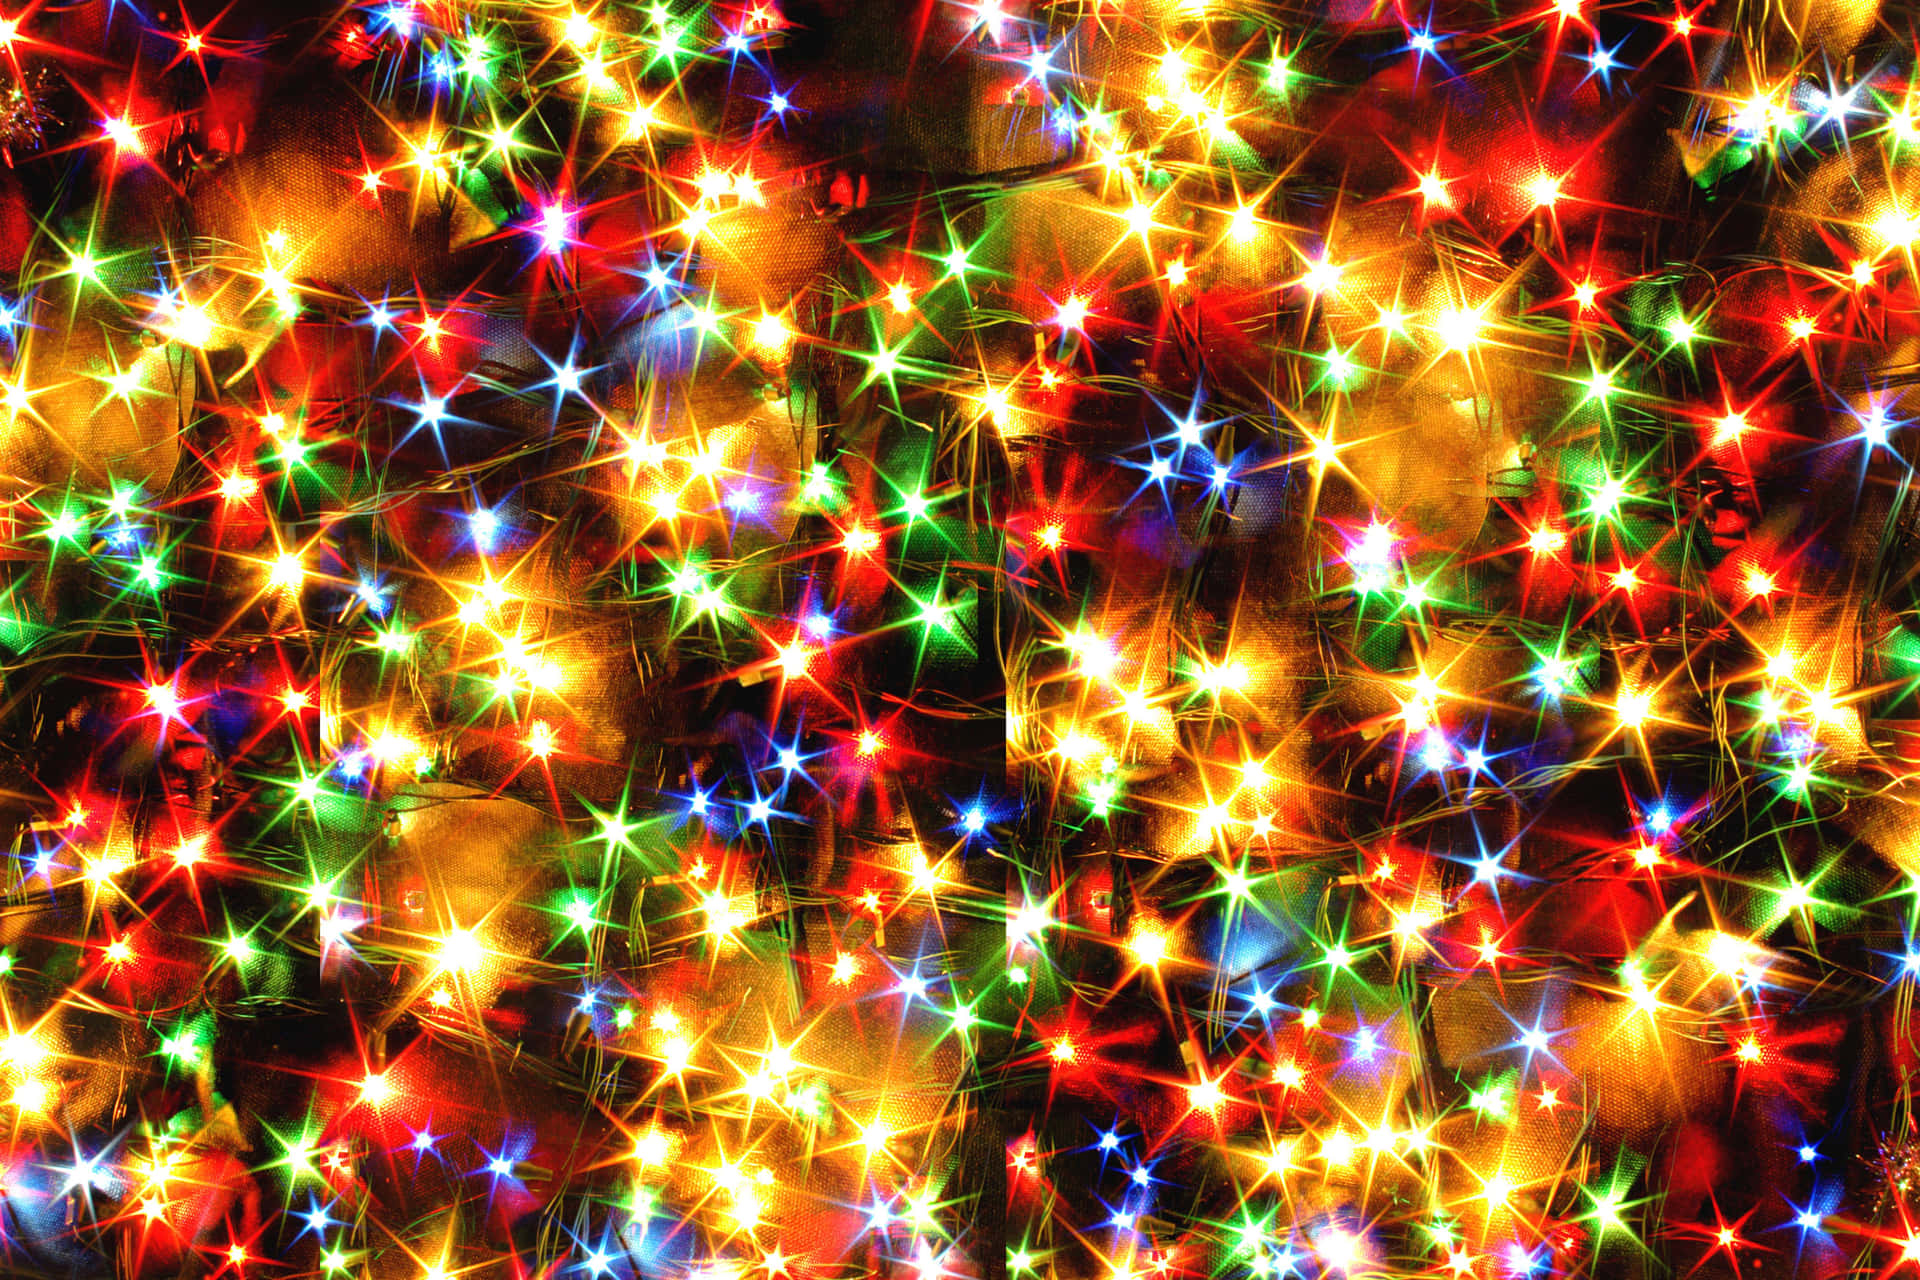 Share the joy of Christmas with the twinkling beauty of festive lights